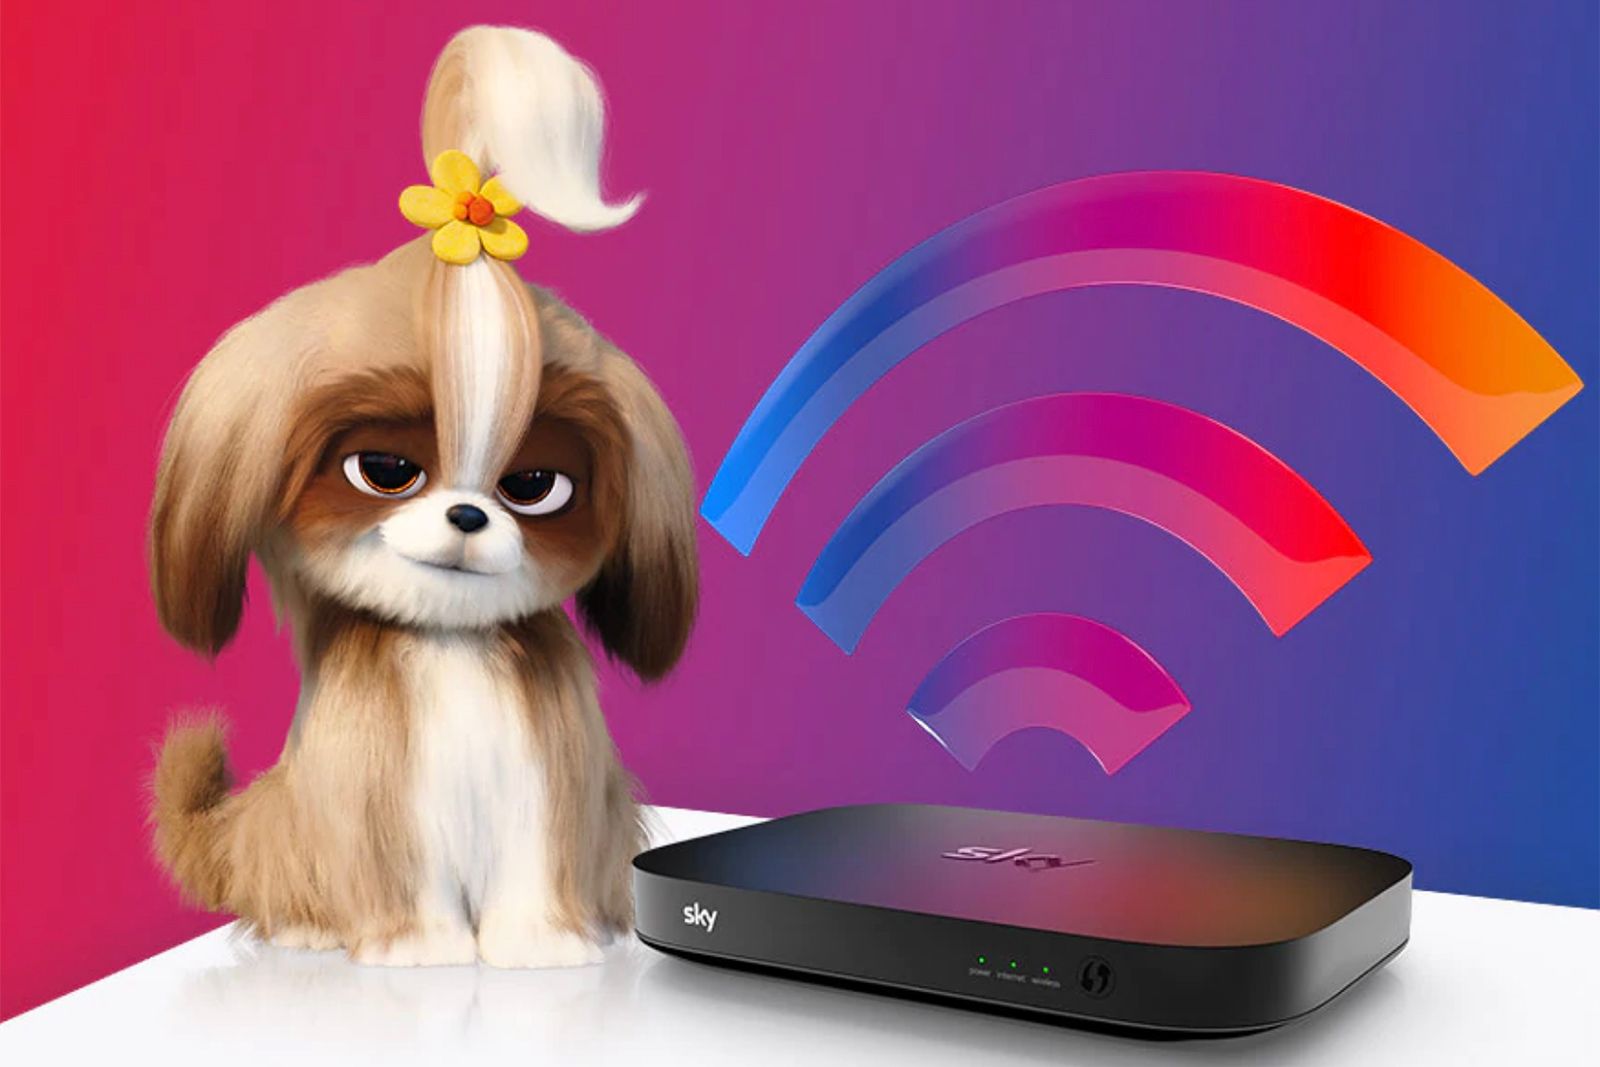 Sky promises strong Wi-Fi in every room or your money back image 1